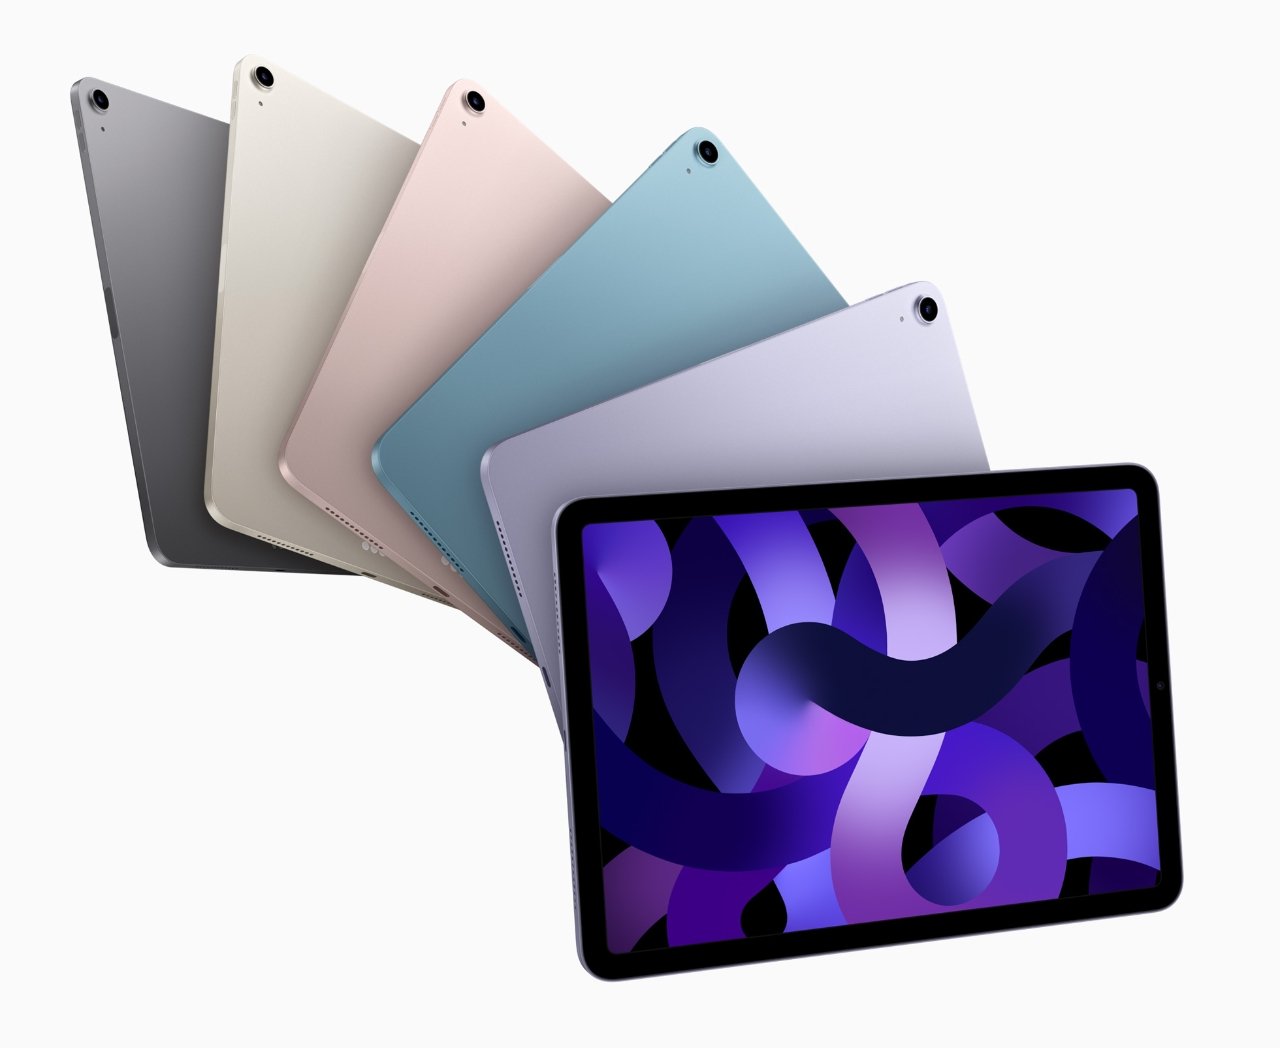 The new colors of the iPad Air